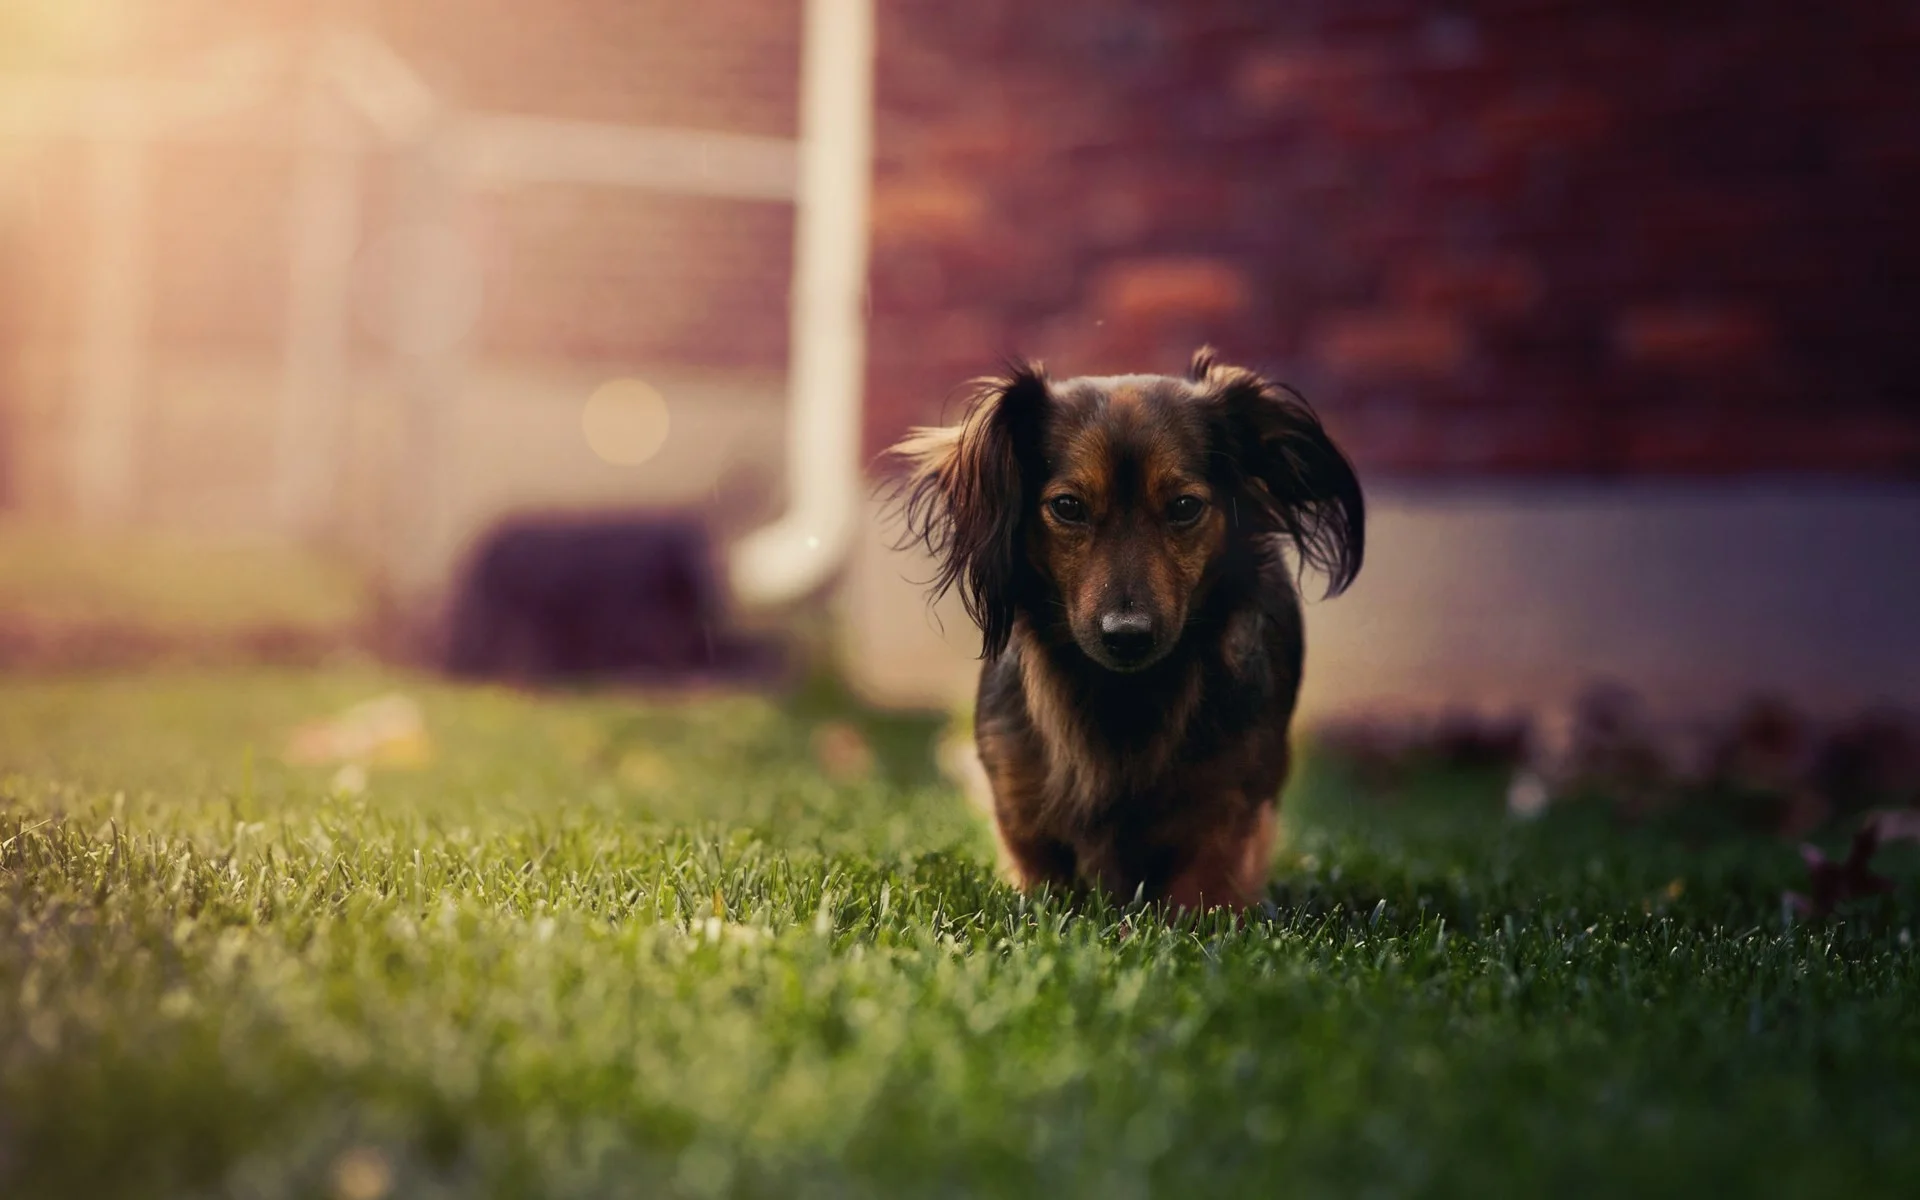 , dachshund category – HD Widescreen Wallpapers – dachshund pic